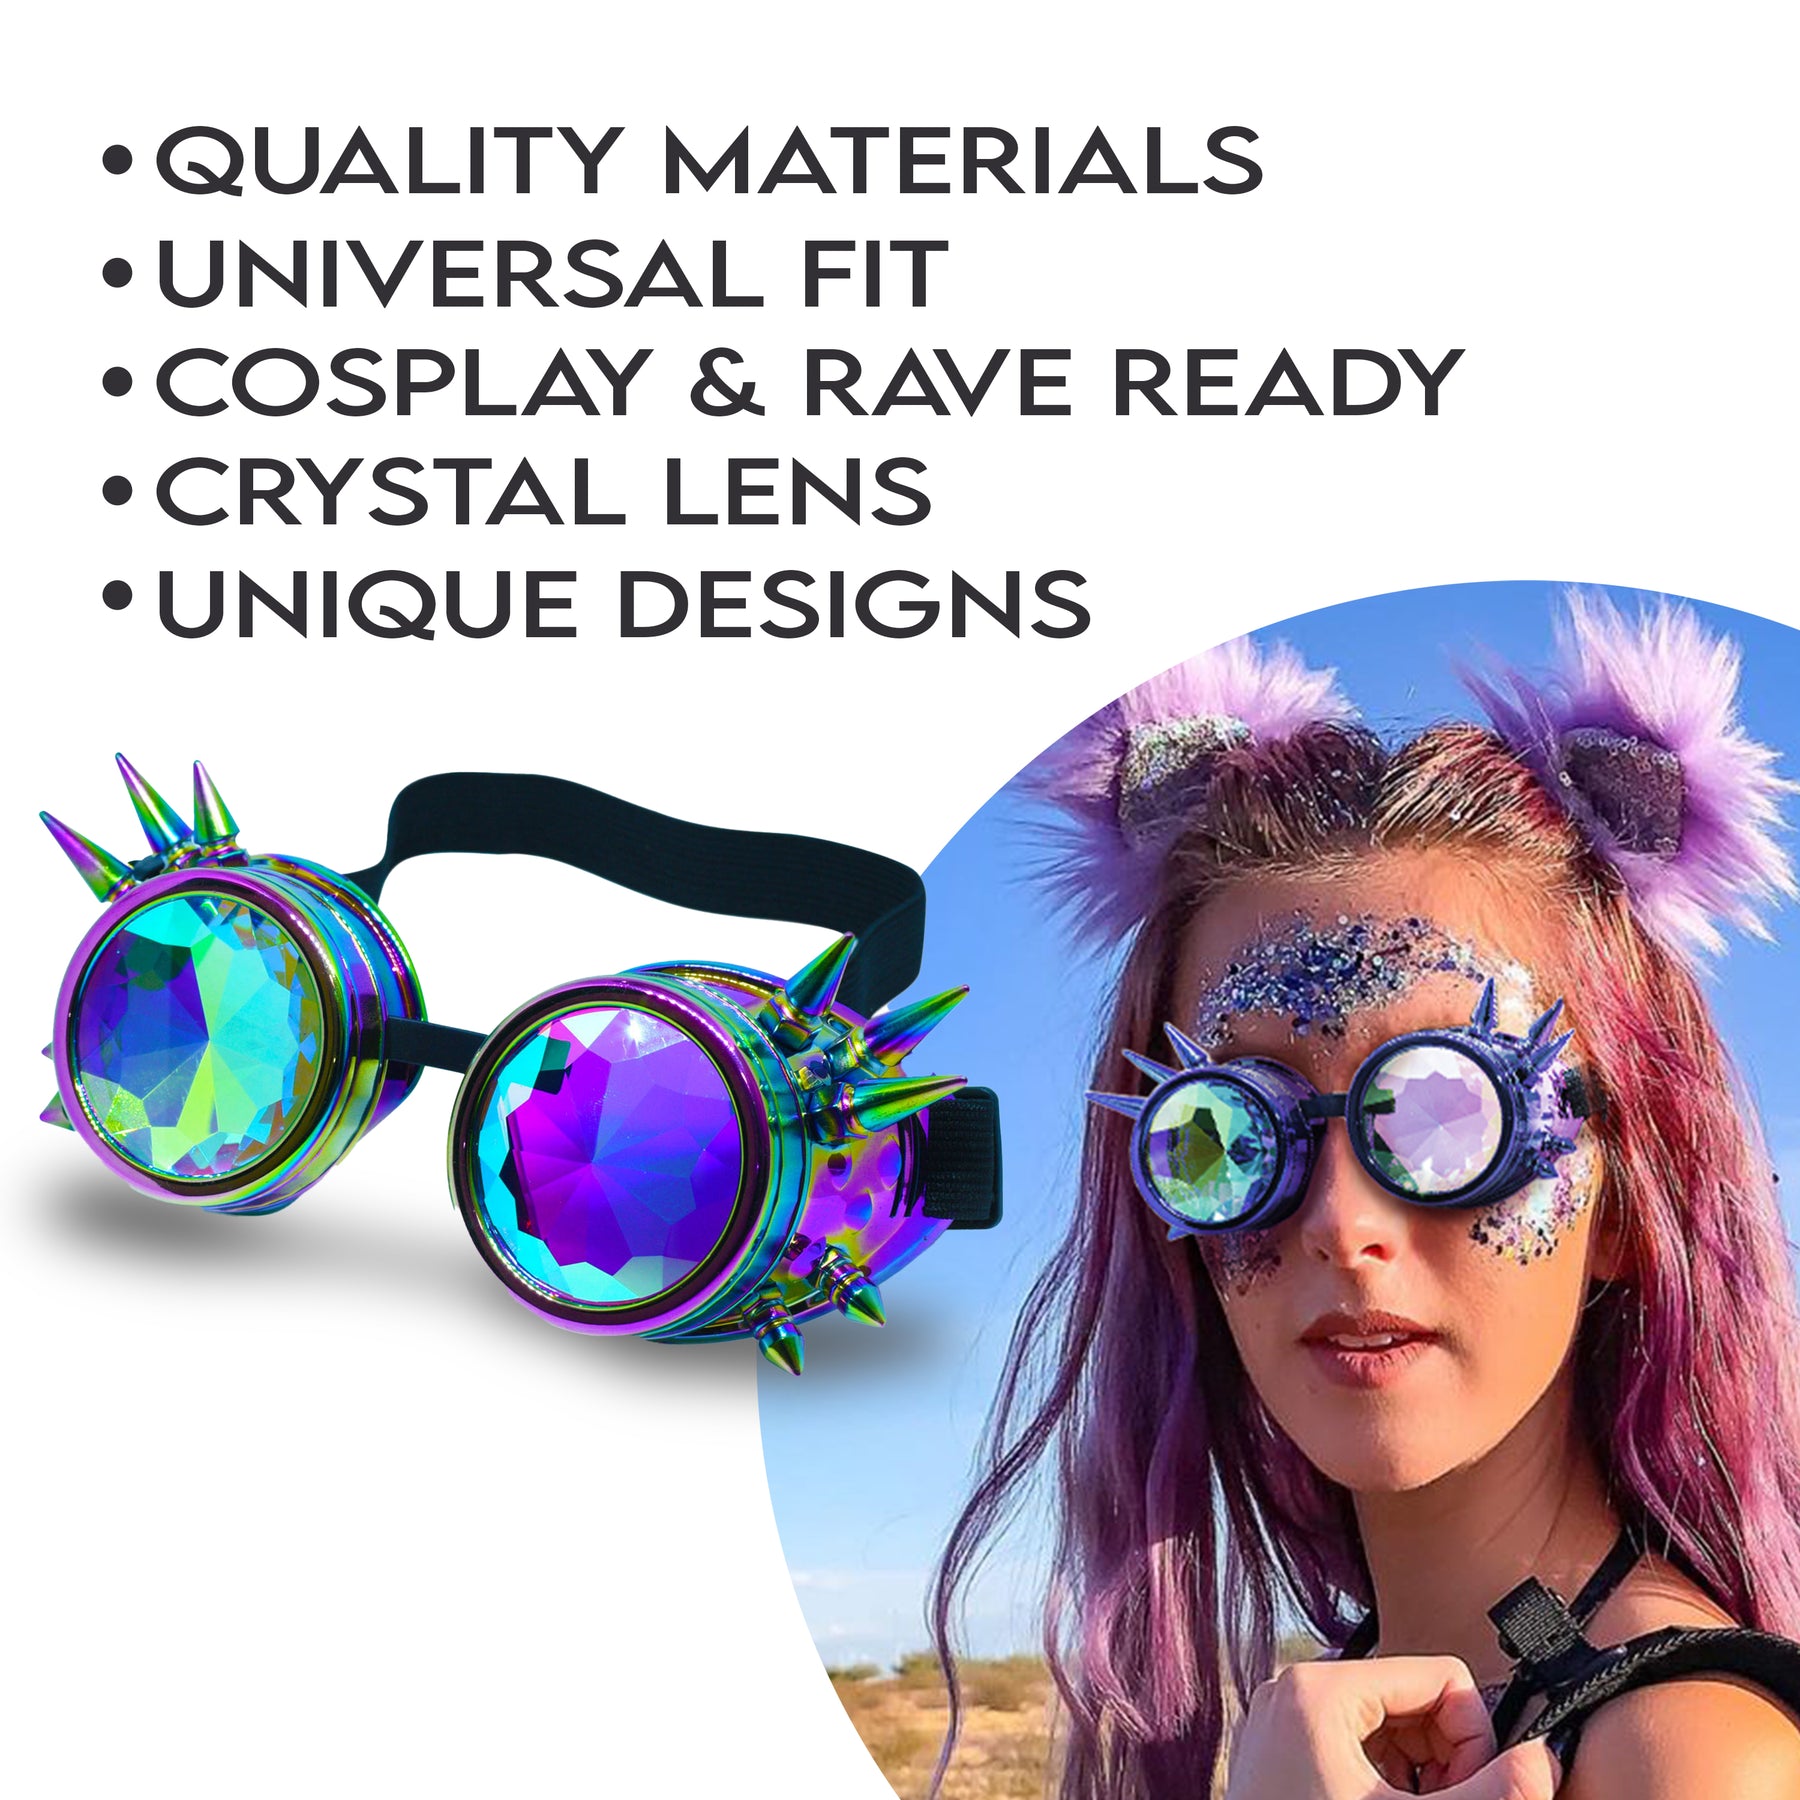 Iridescent Rainbow Steampunk Goggles Kaleidoscope Glasses - Trippy Psychedelic Rave Goggles - Funky Prism Glasses For Raves - Festival Accessories